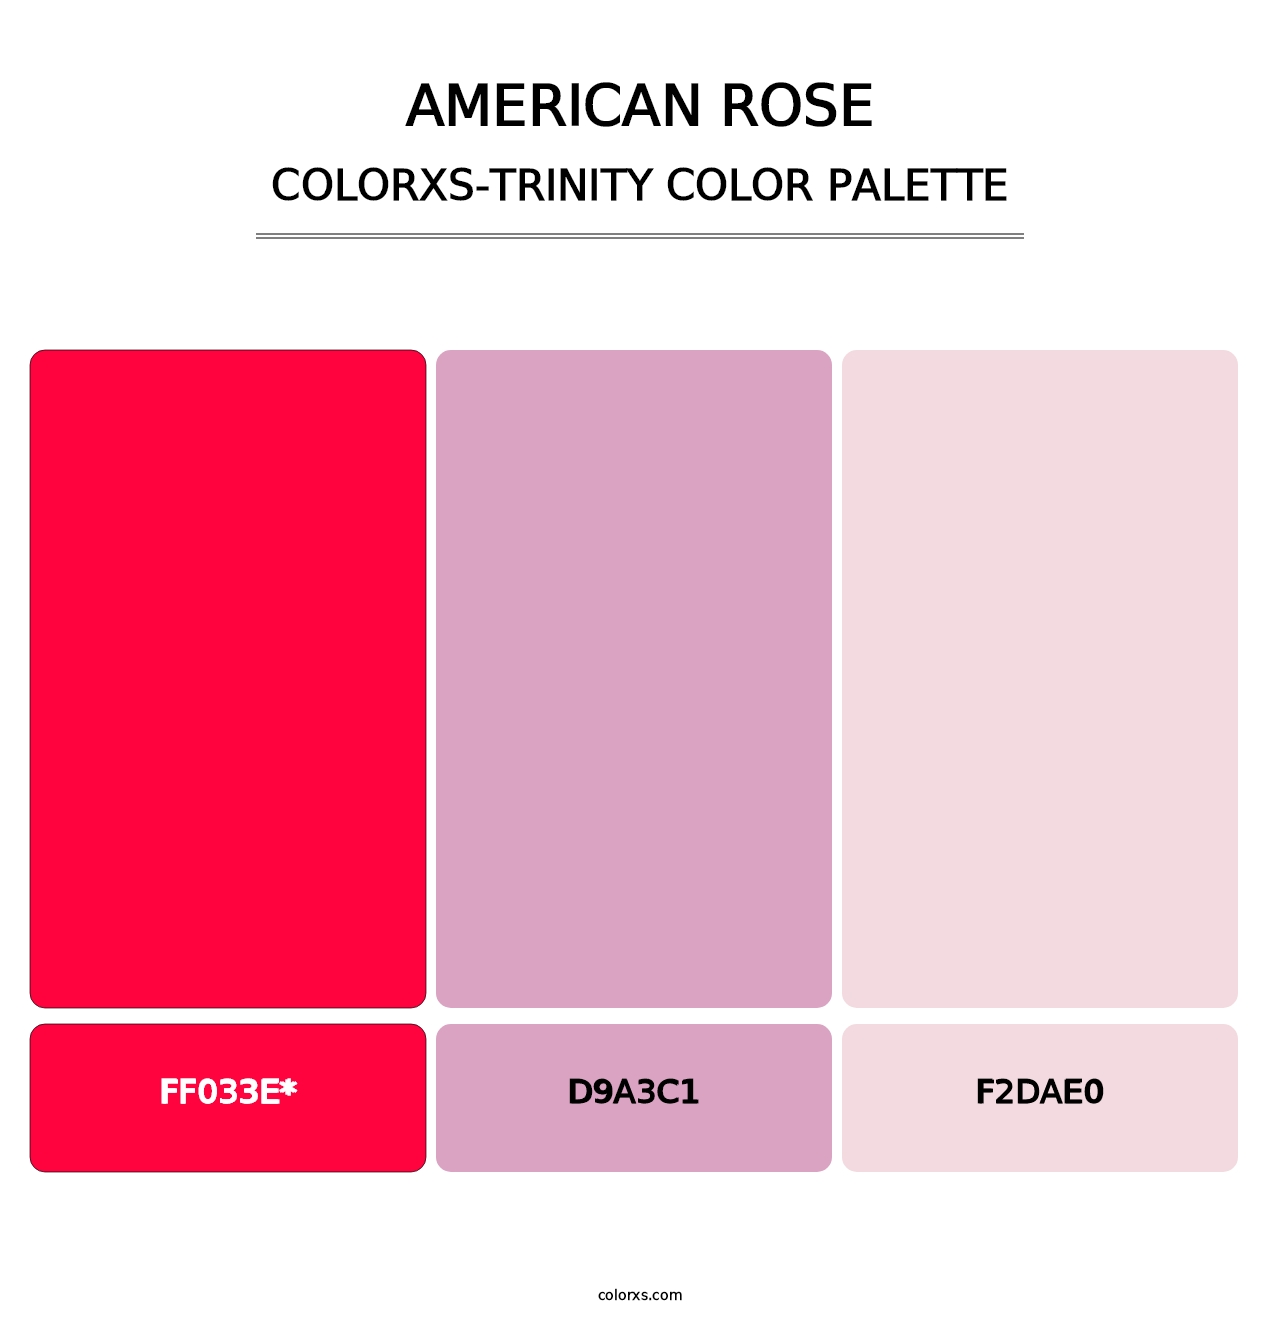 American Rose - Colorxs Trinity Palette